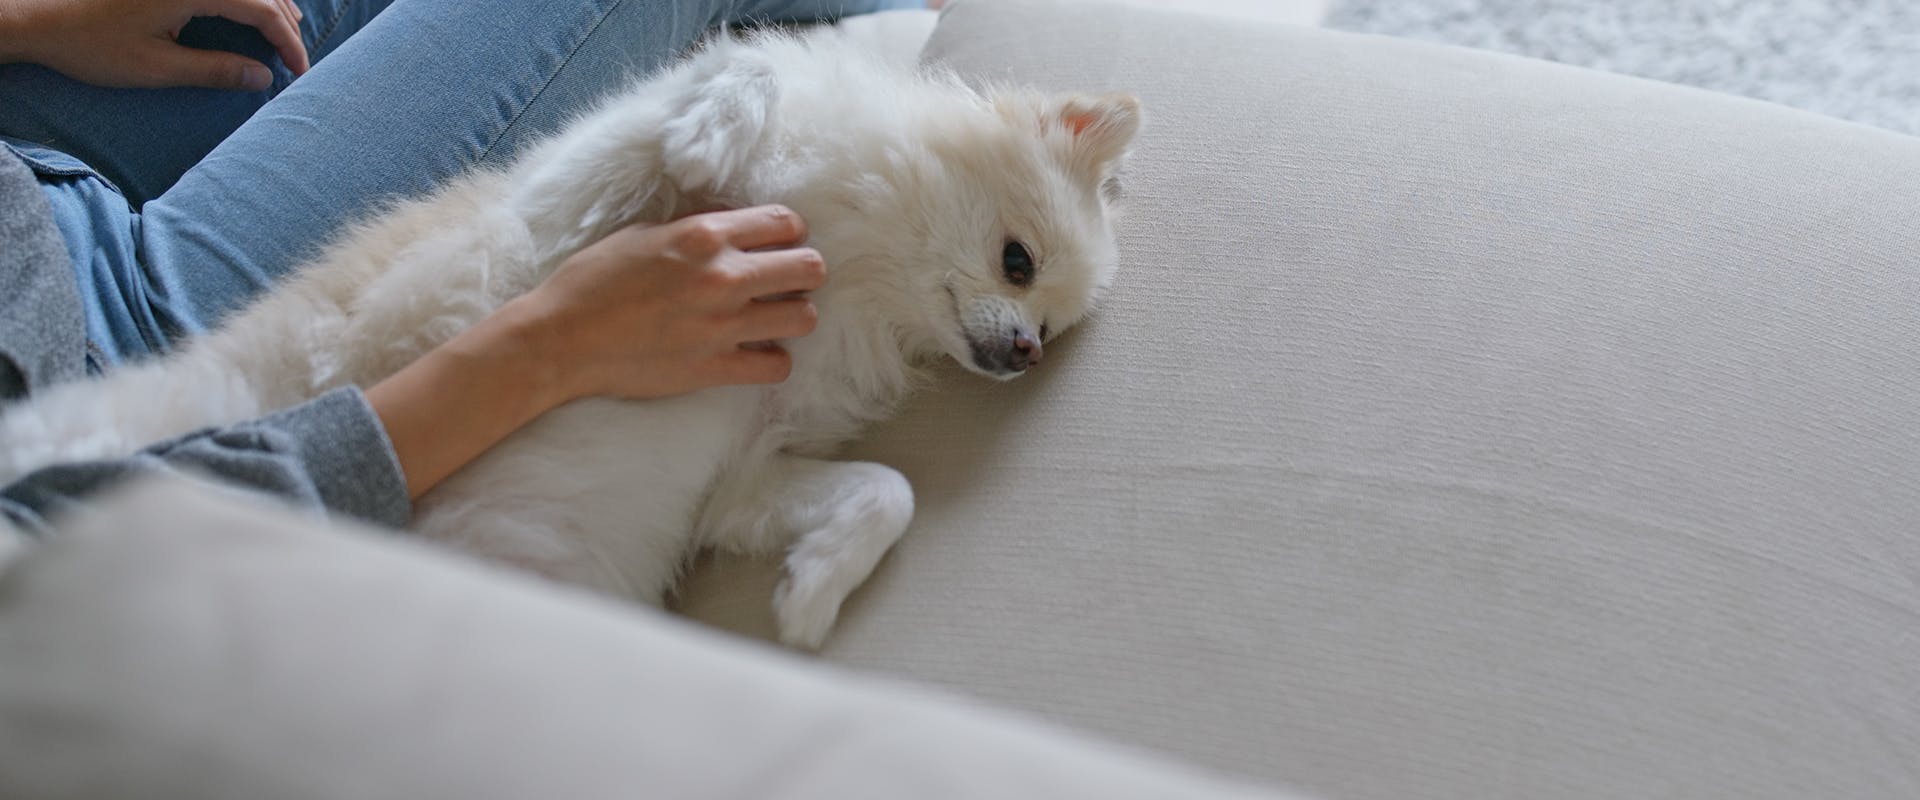 A Pomeranian puppy laying on its back on a grey sofa, a hand coming down to stroke its tummy